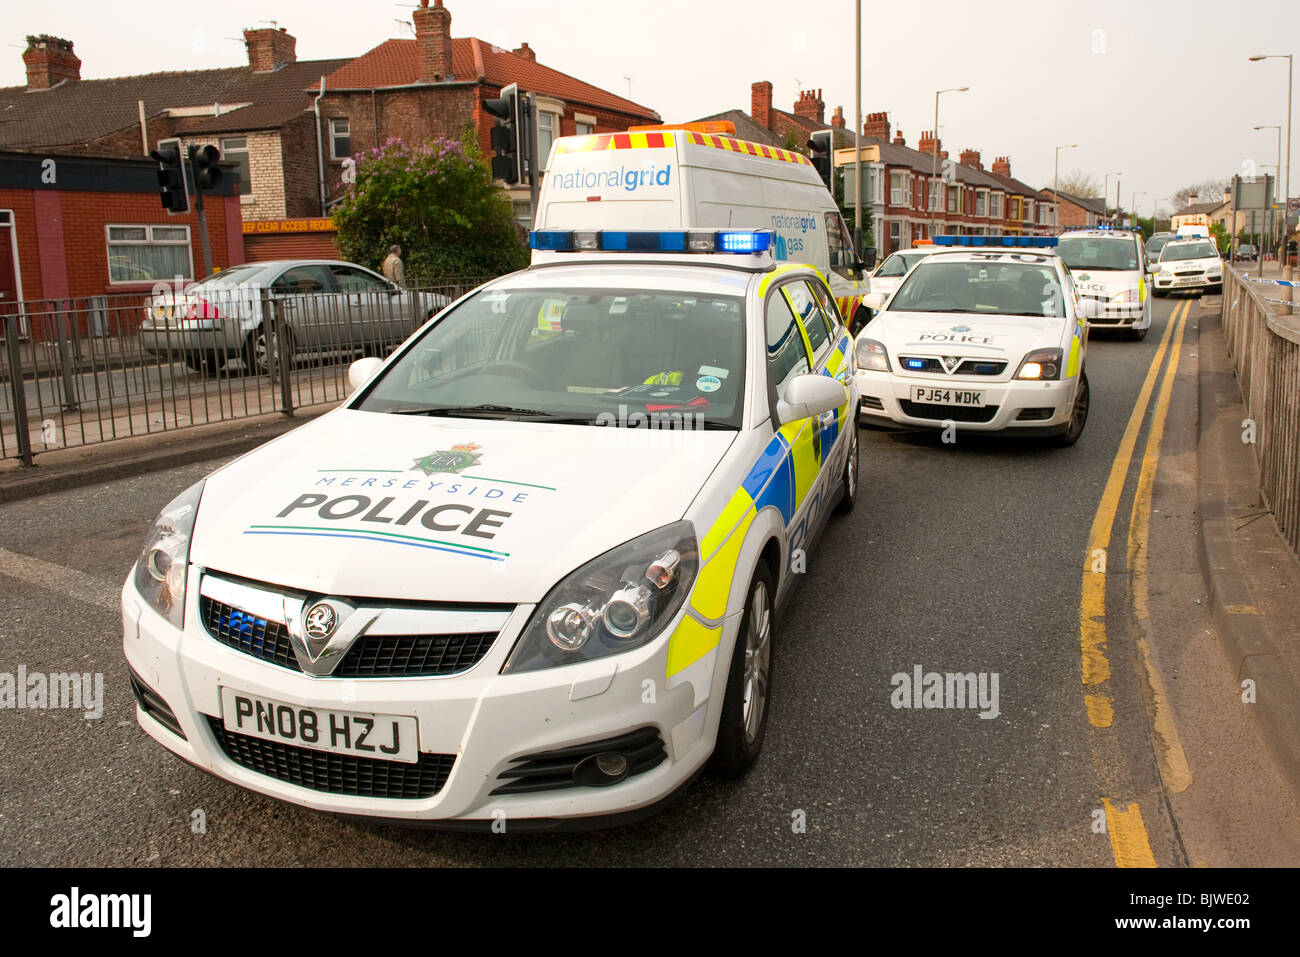 Several police cars and vehicles blocking road Stock Photo